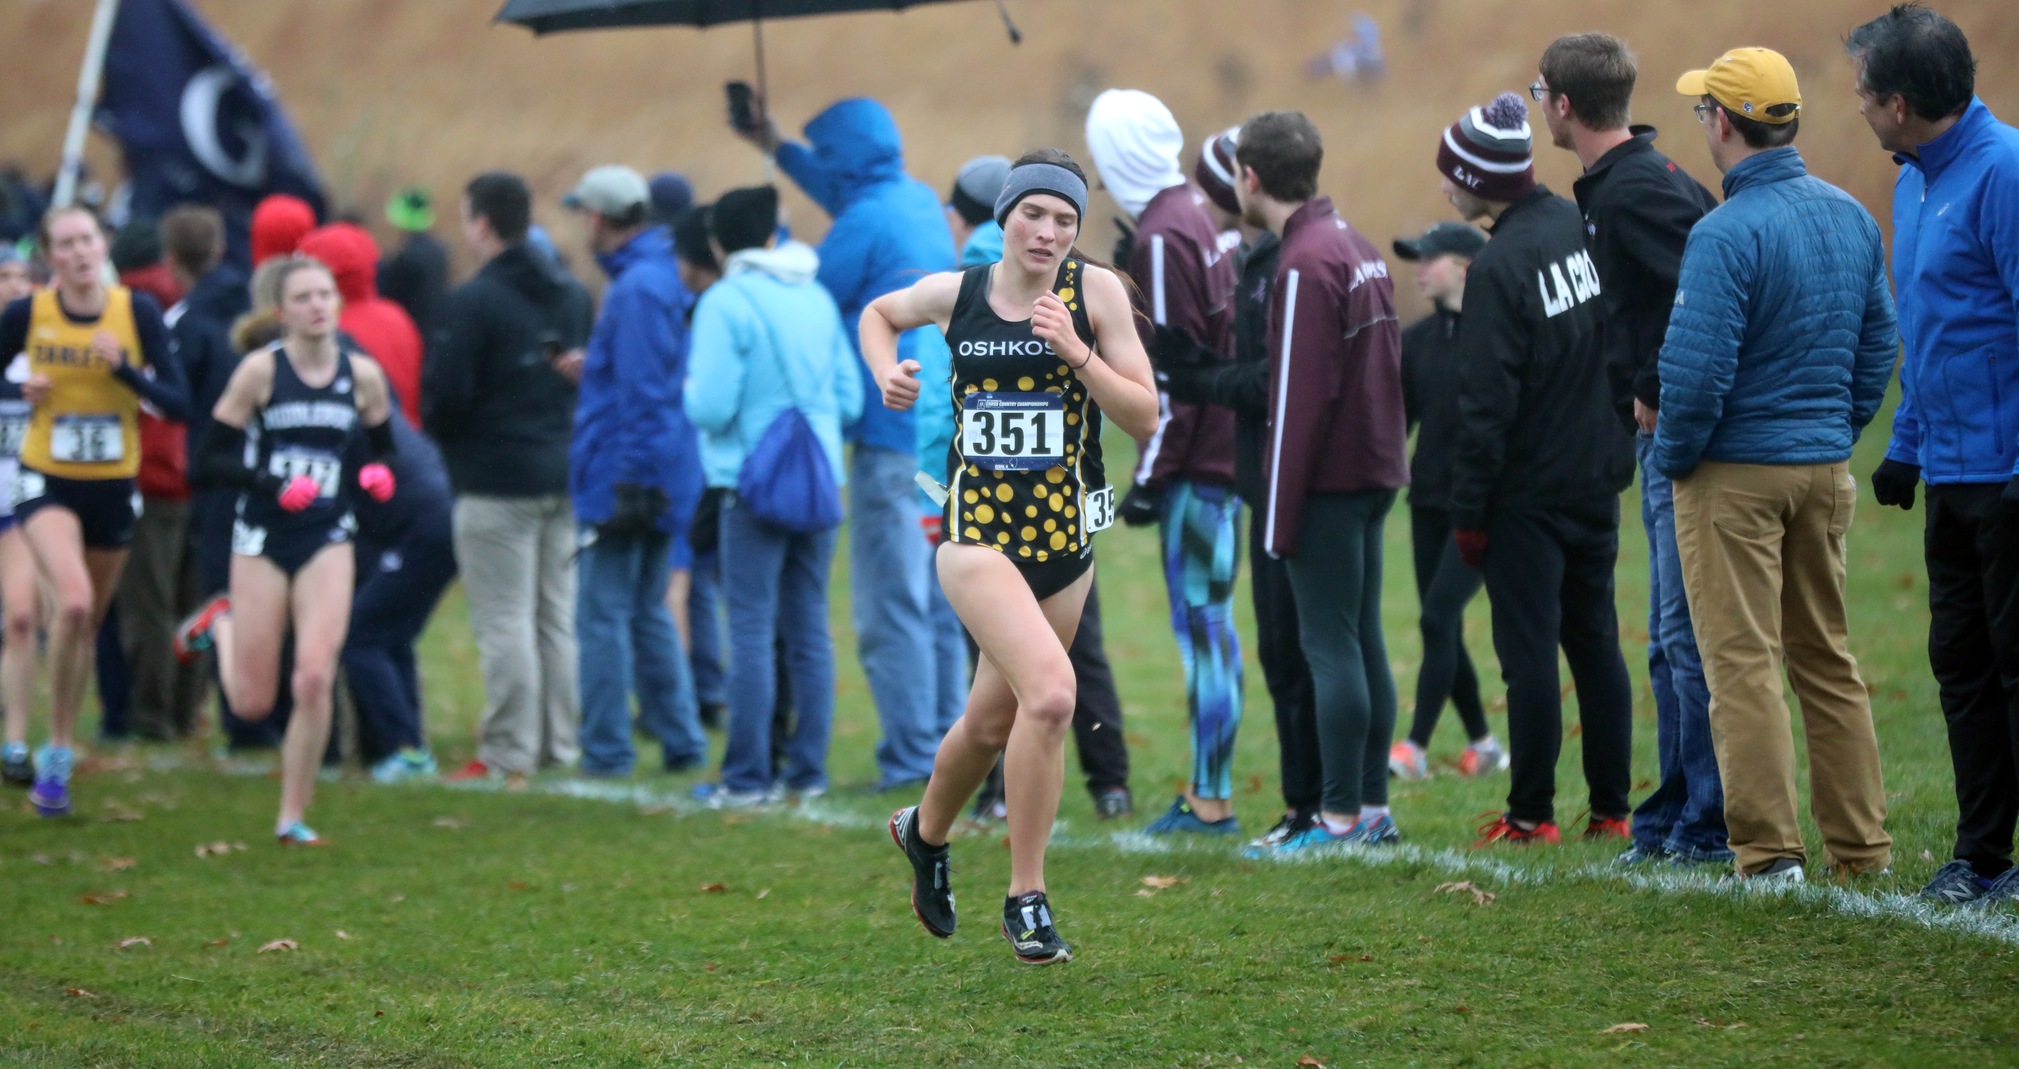 Cheyenne Moore earned All-America honors in her final cross country race as a Titan.